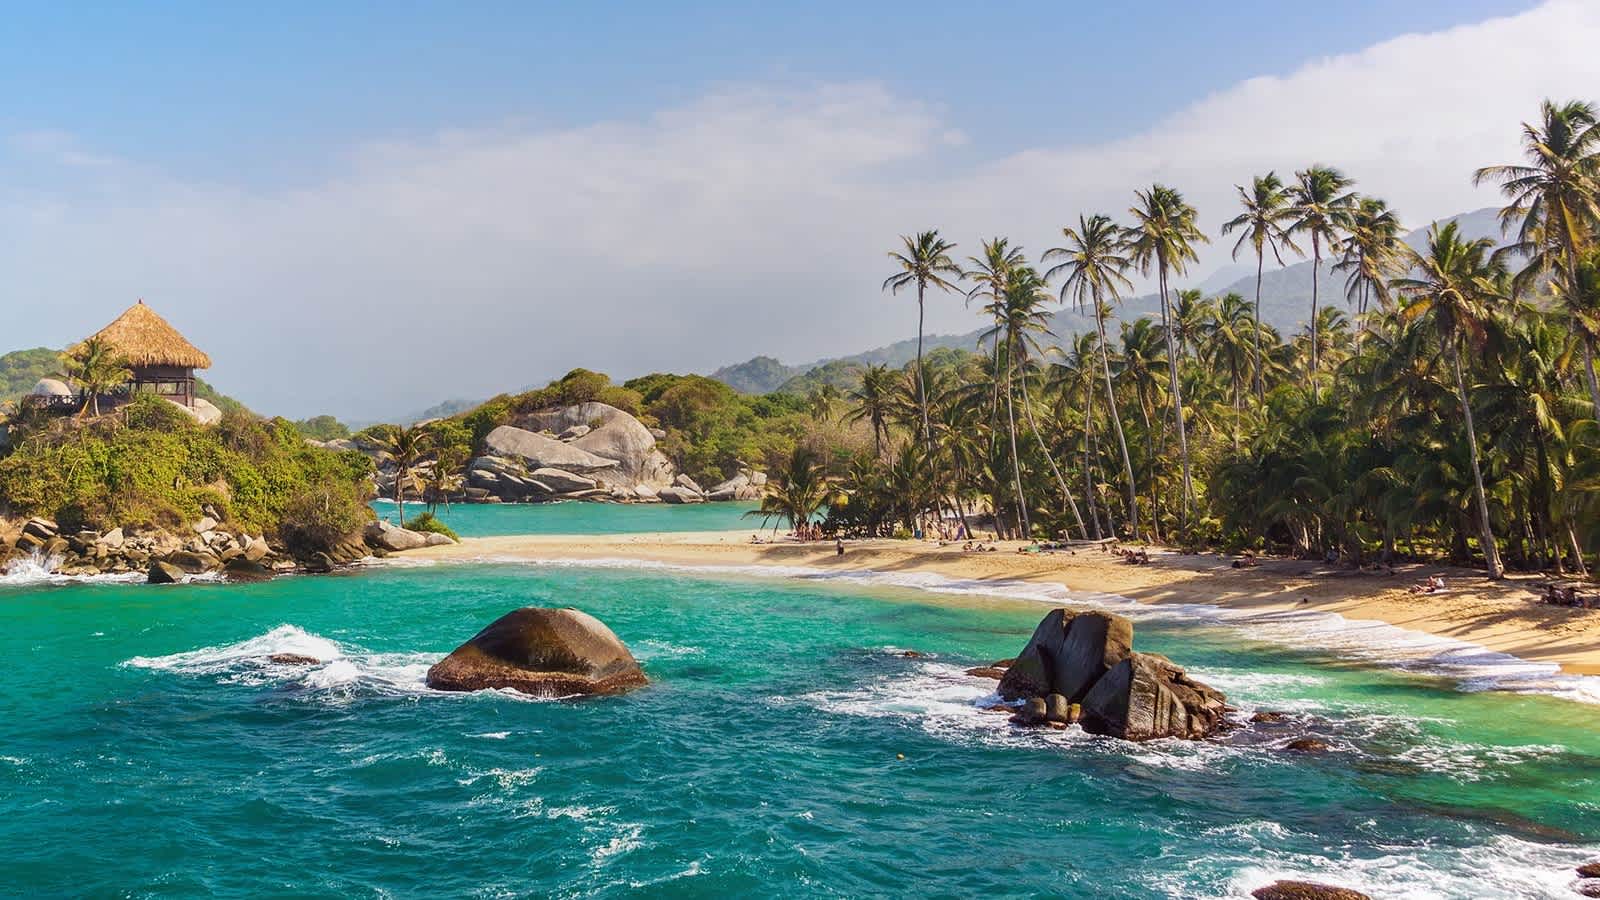 The Tayrona National Park in Colombia